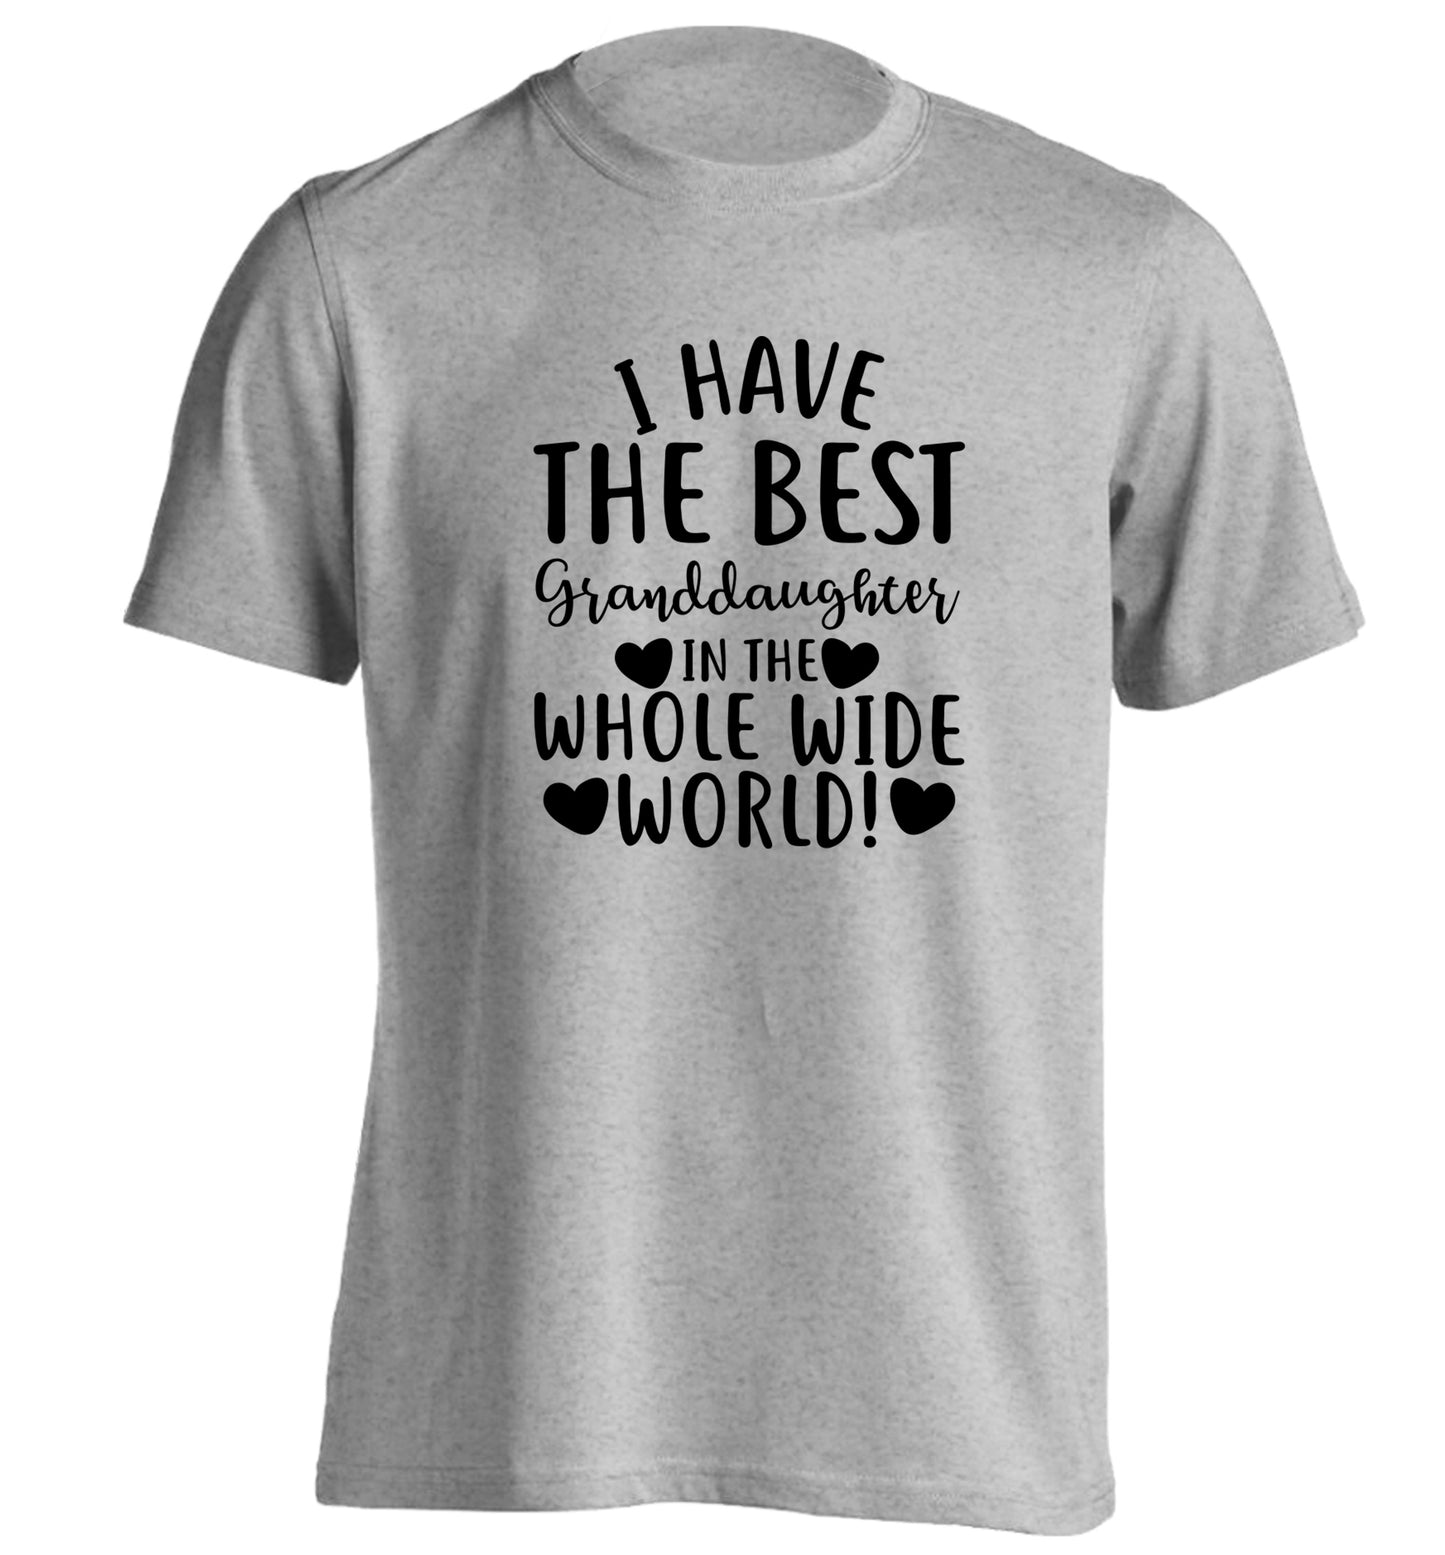 I have the best granddaughter in the whole wide world! adults unisex grey Tshirt 2XL